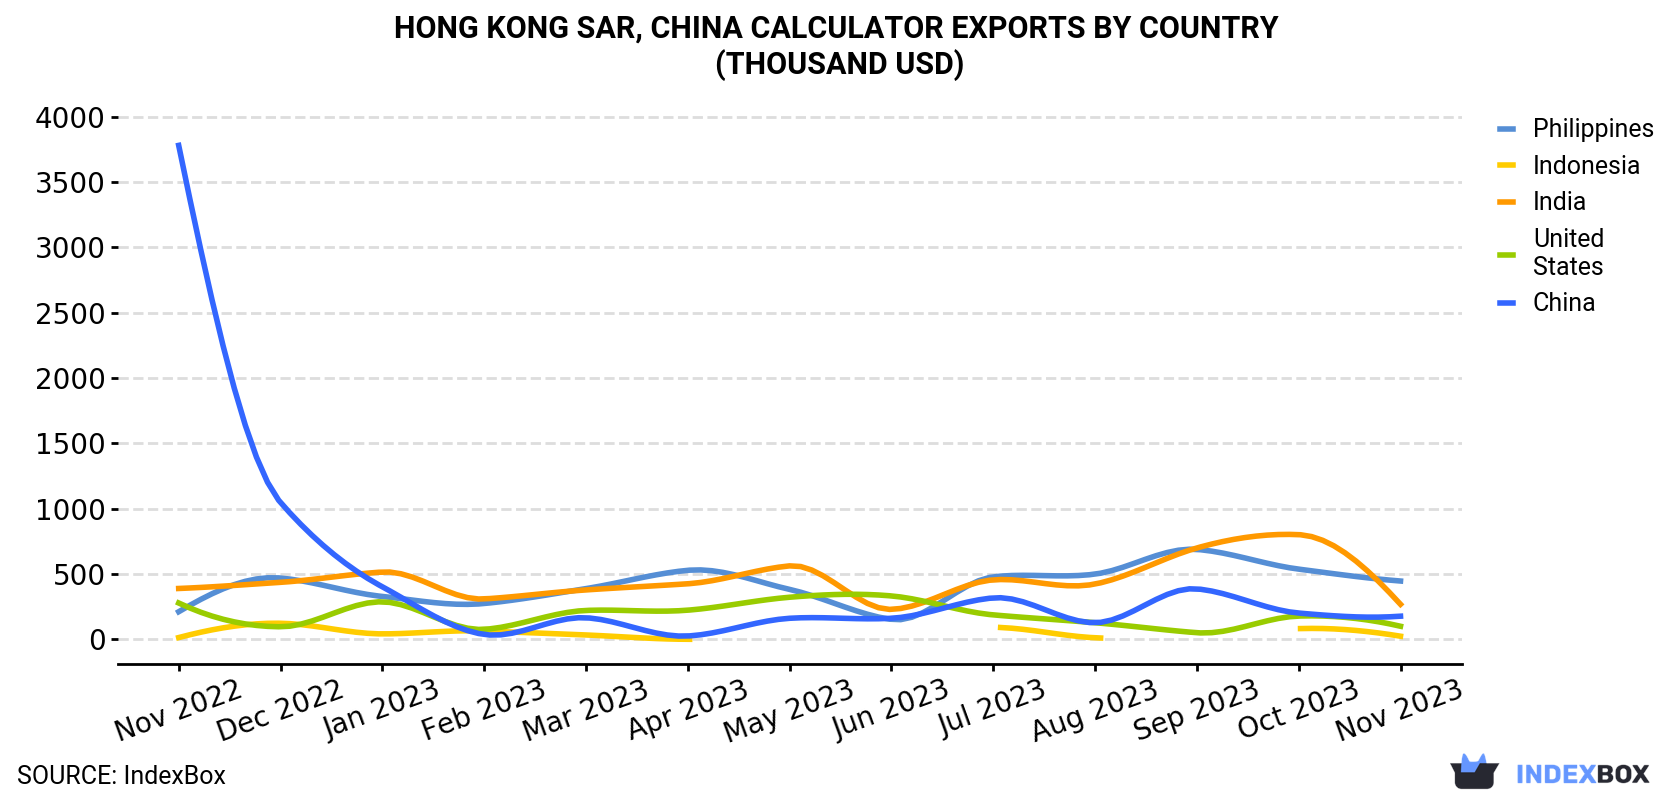 Hong Kong Calculator Exports By Country (Thousand USD)